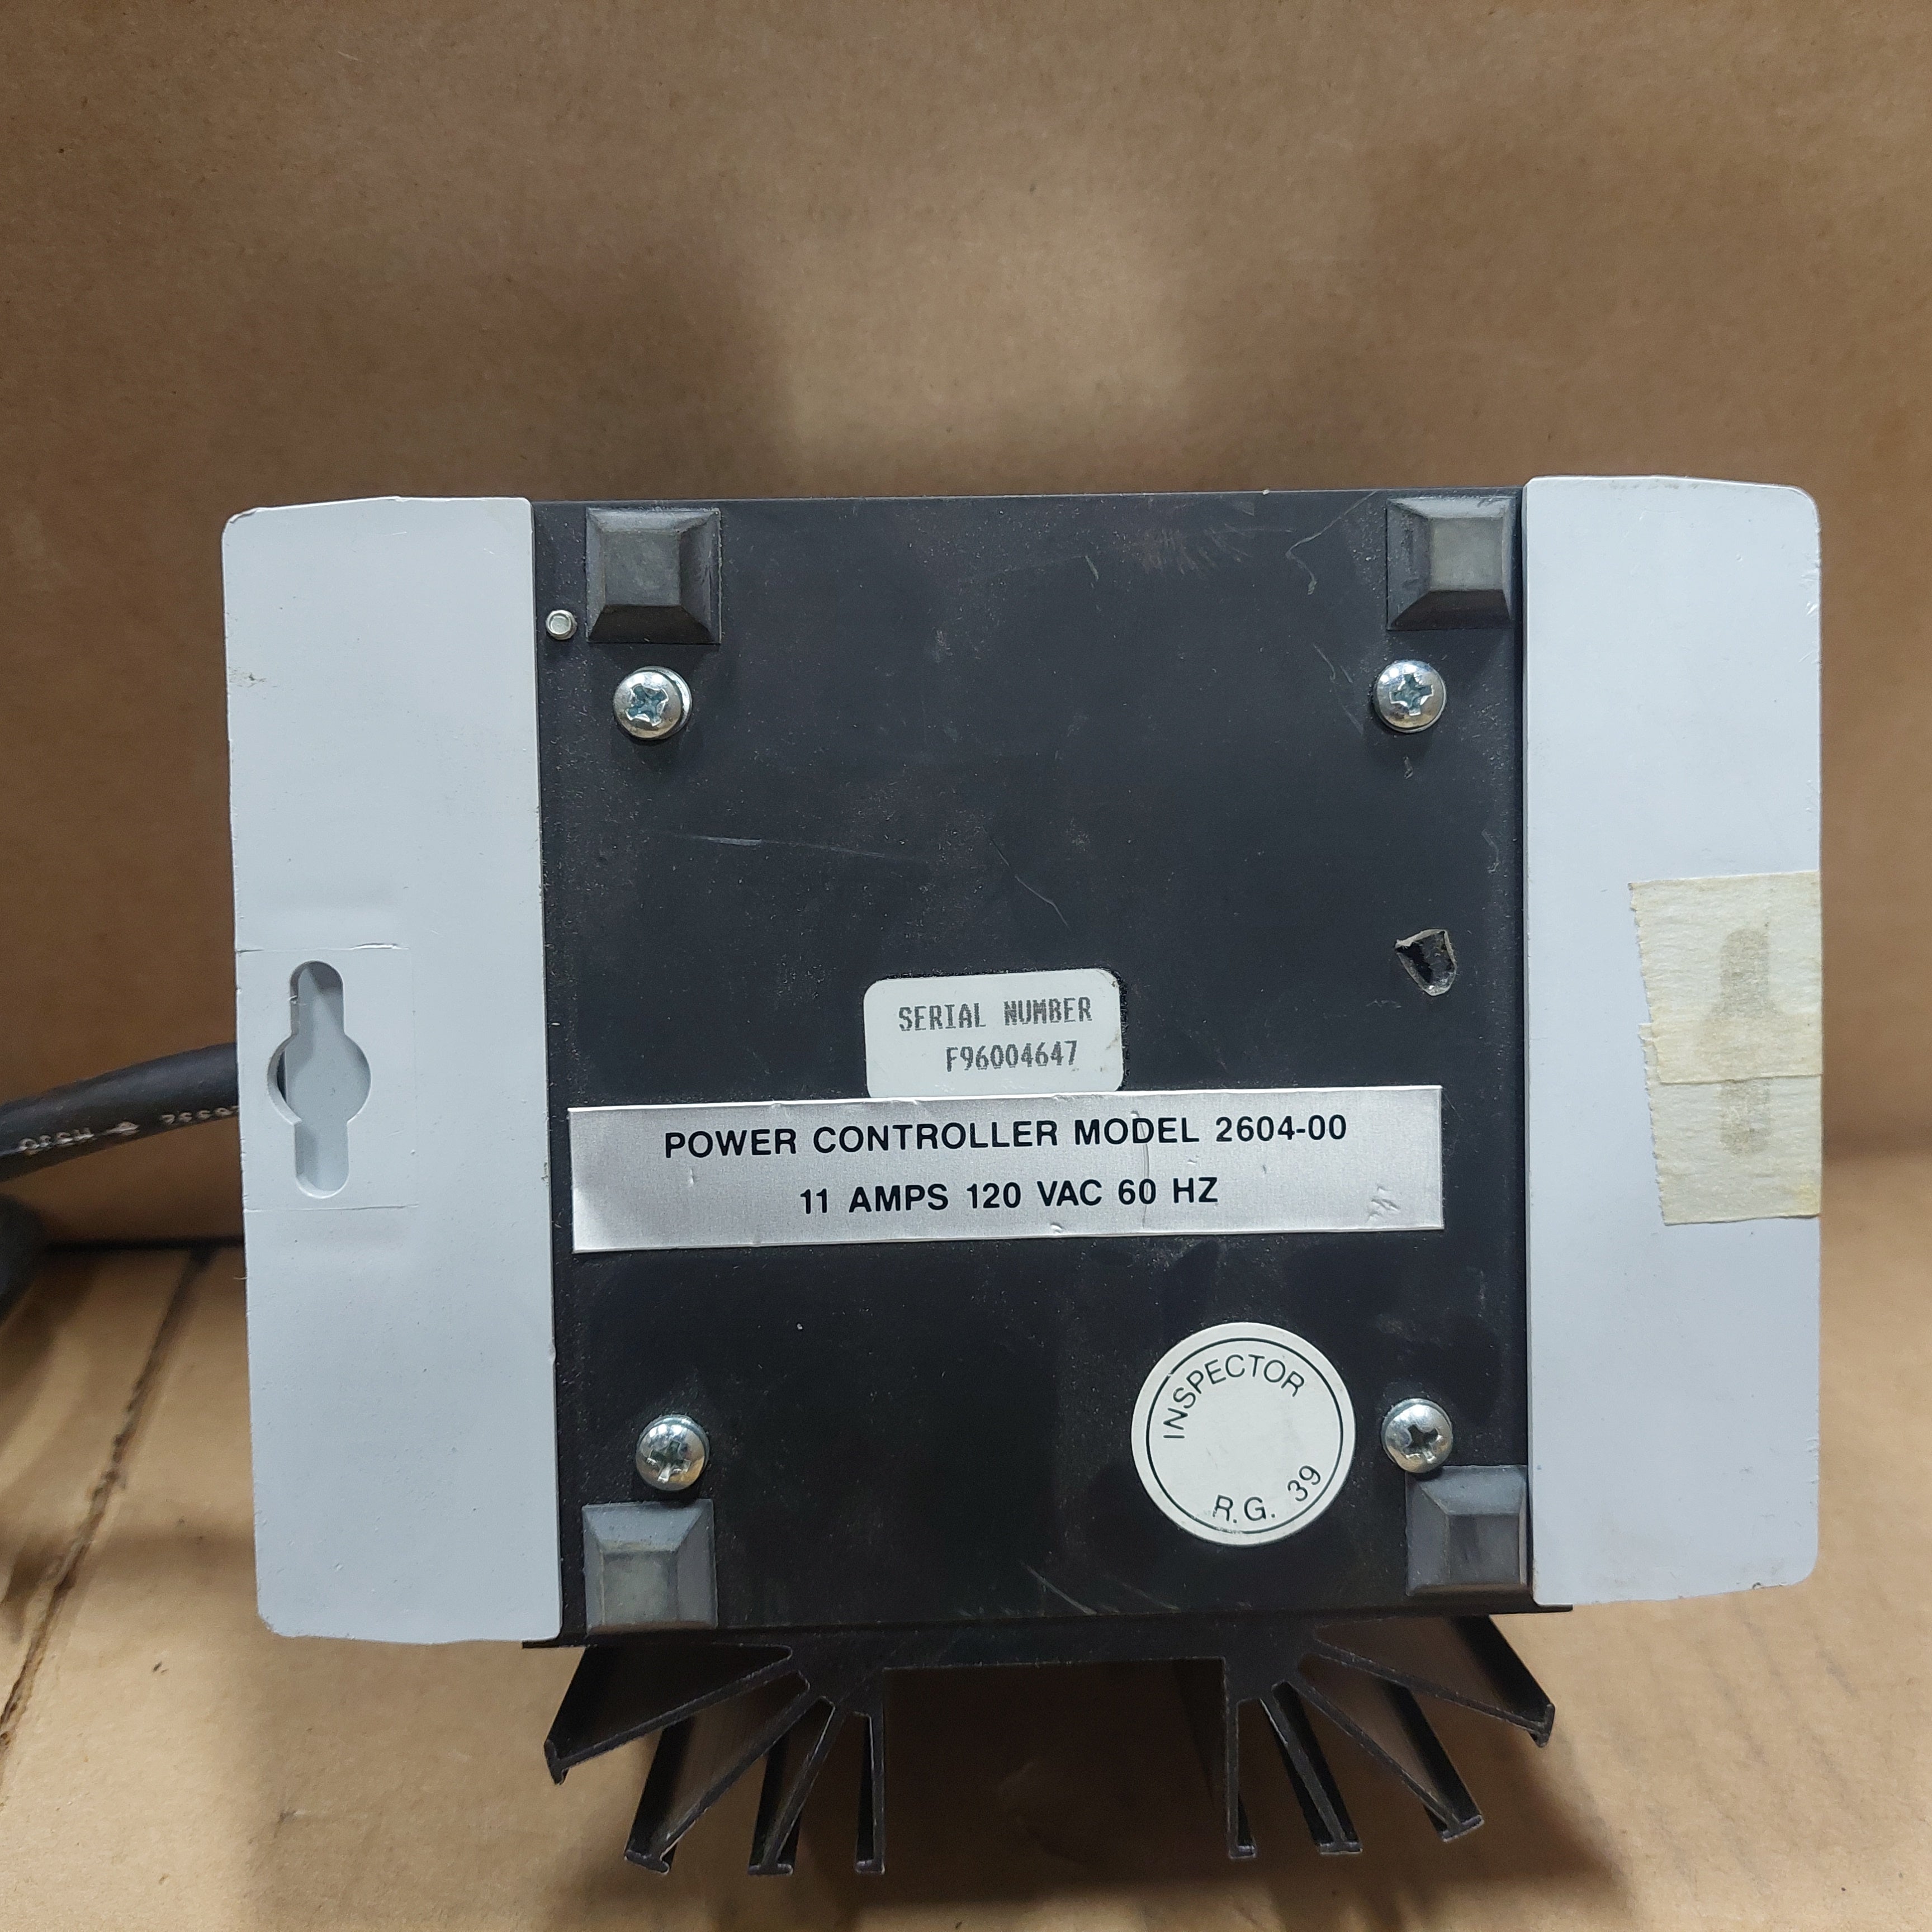 Cole-Parmer Instrument 2604-00 Power Controller Used